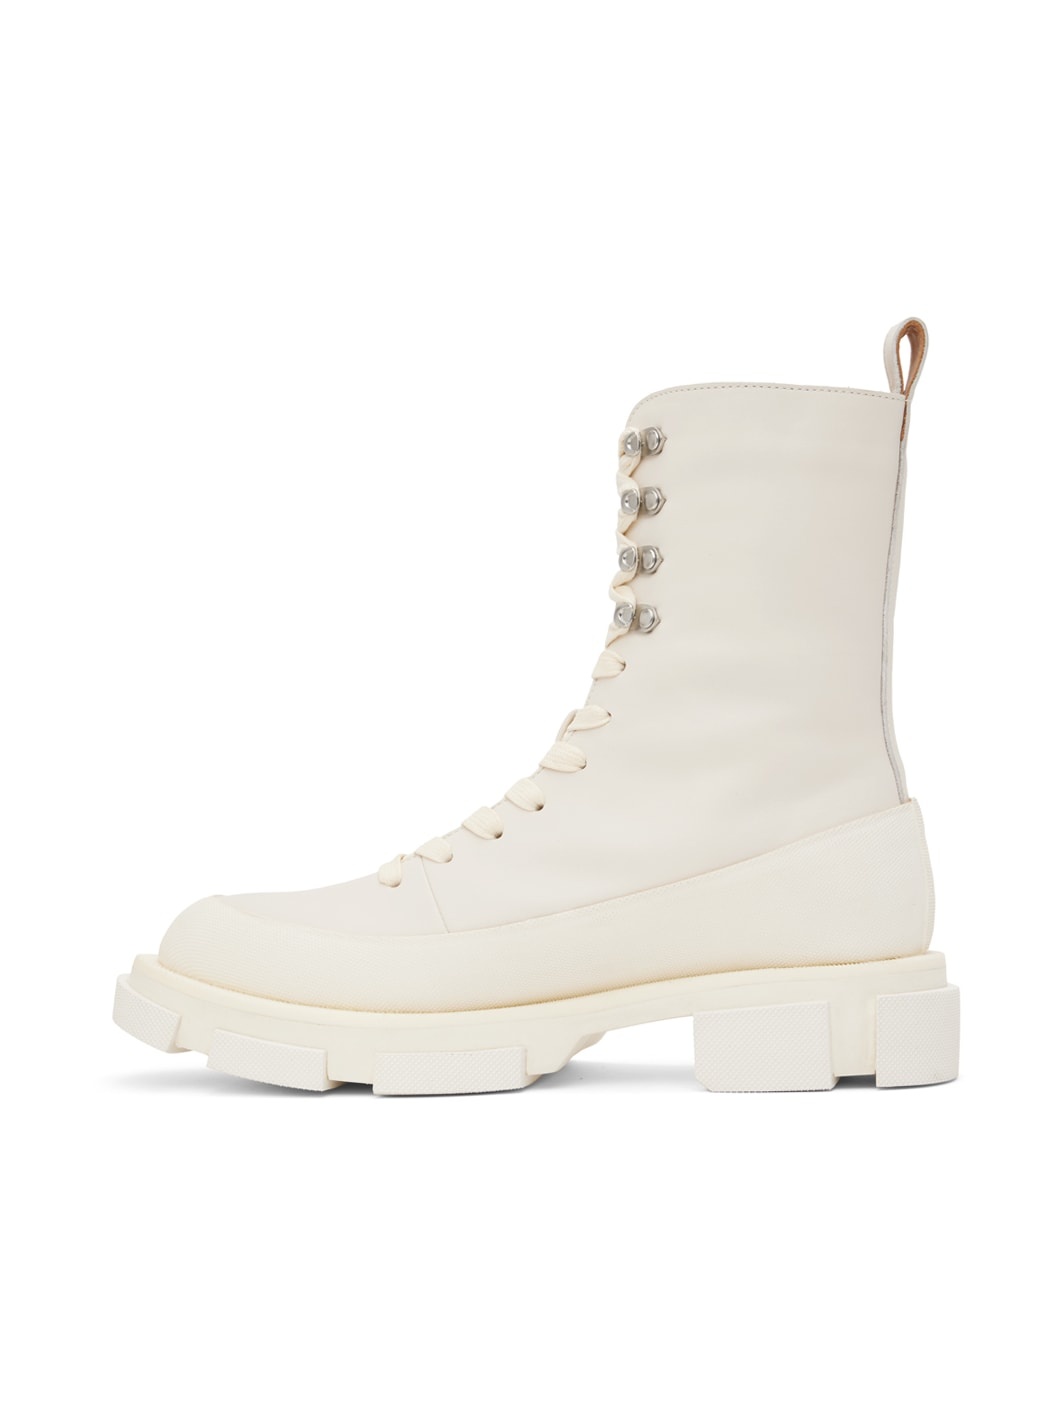 Off-White Gao High Boots - 3